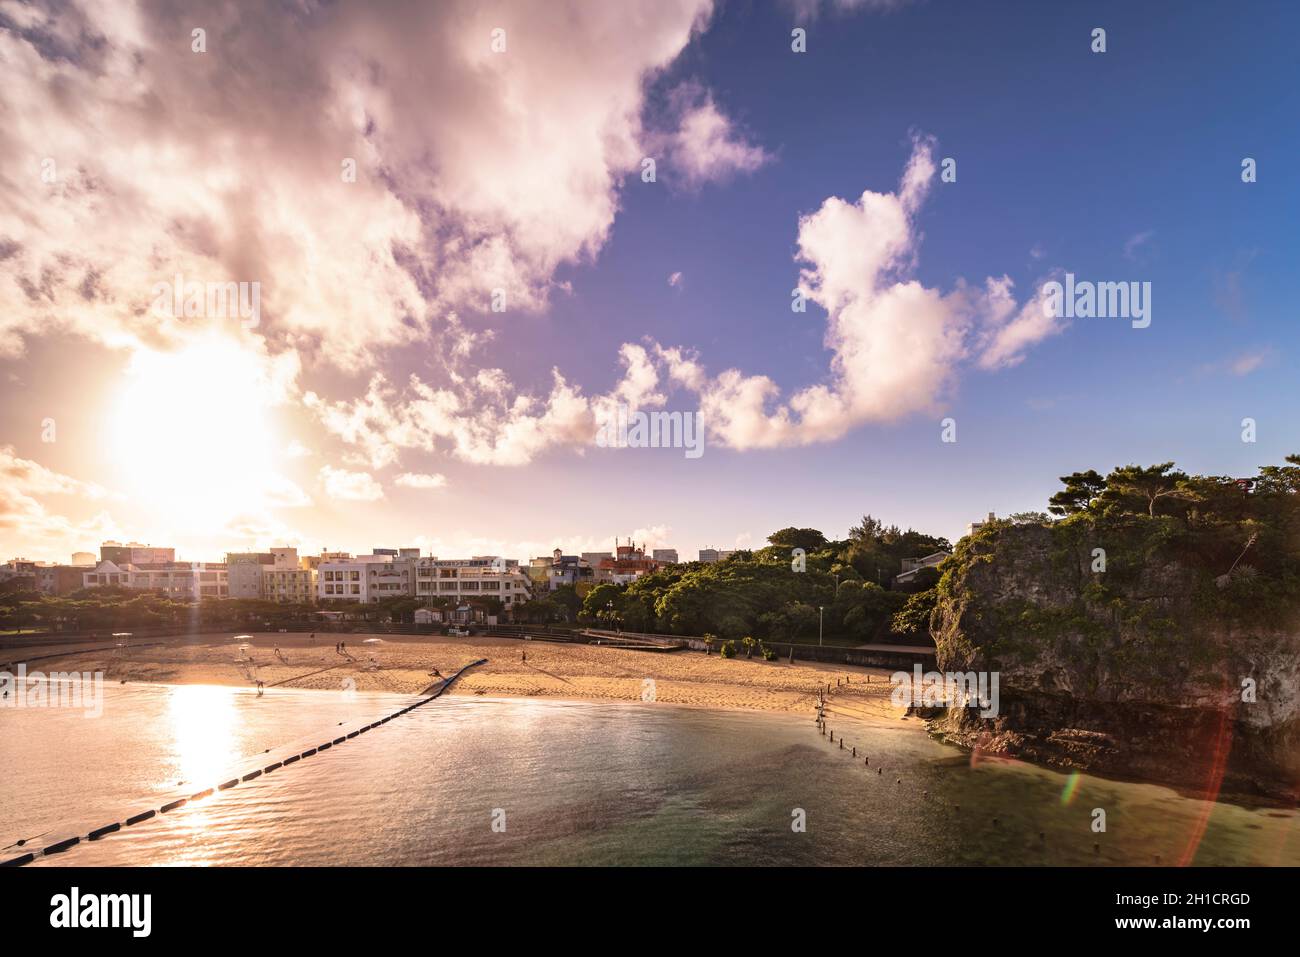 Sunrise landscape of the Shinto Shrine Naminoue at the top of a cliff overlooking the beach and ocean of Naha in Okinawa Prefecture, Japan. Stock Photo